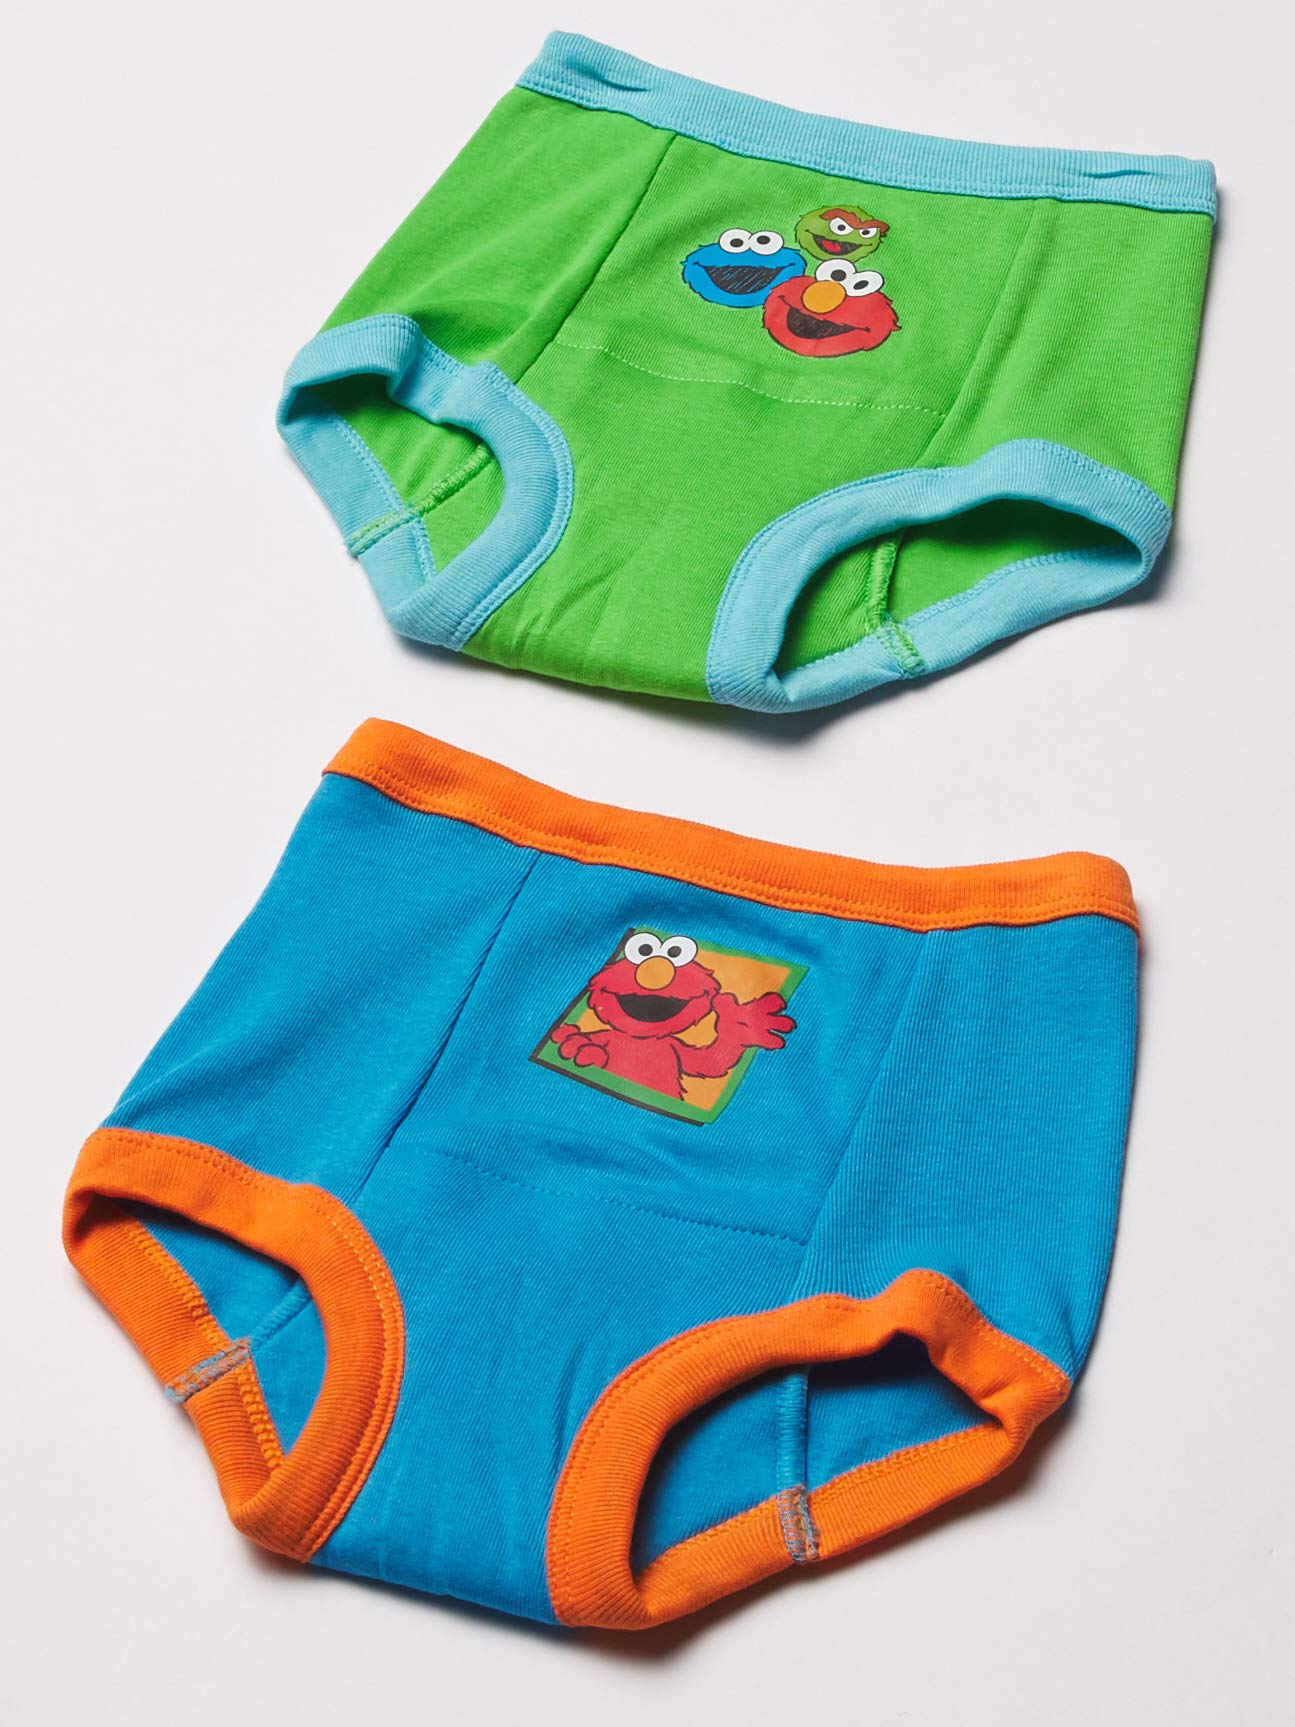 Sesame Street Unisex Toddler Potty Training Pants with Elmo, Cookie Monster and Big Bird with Stickers & Success Chart